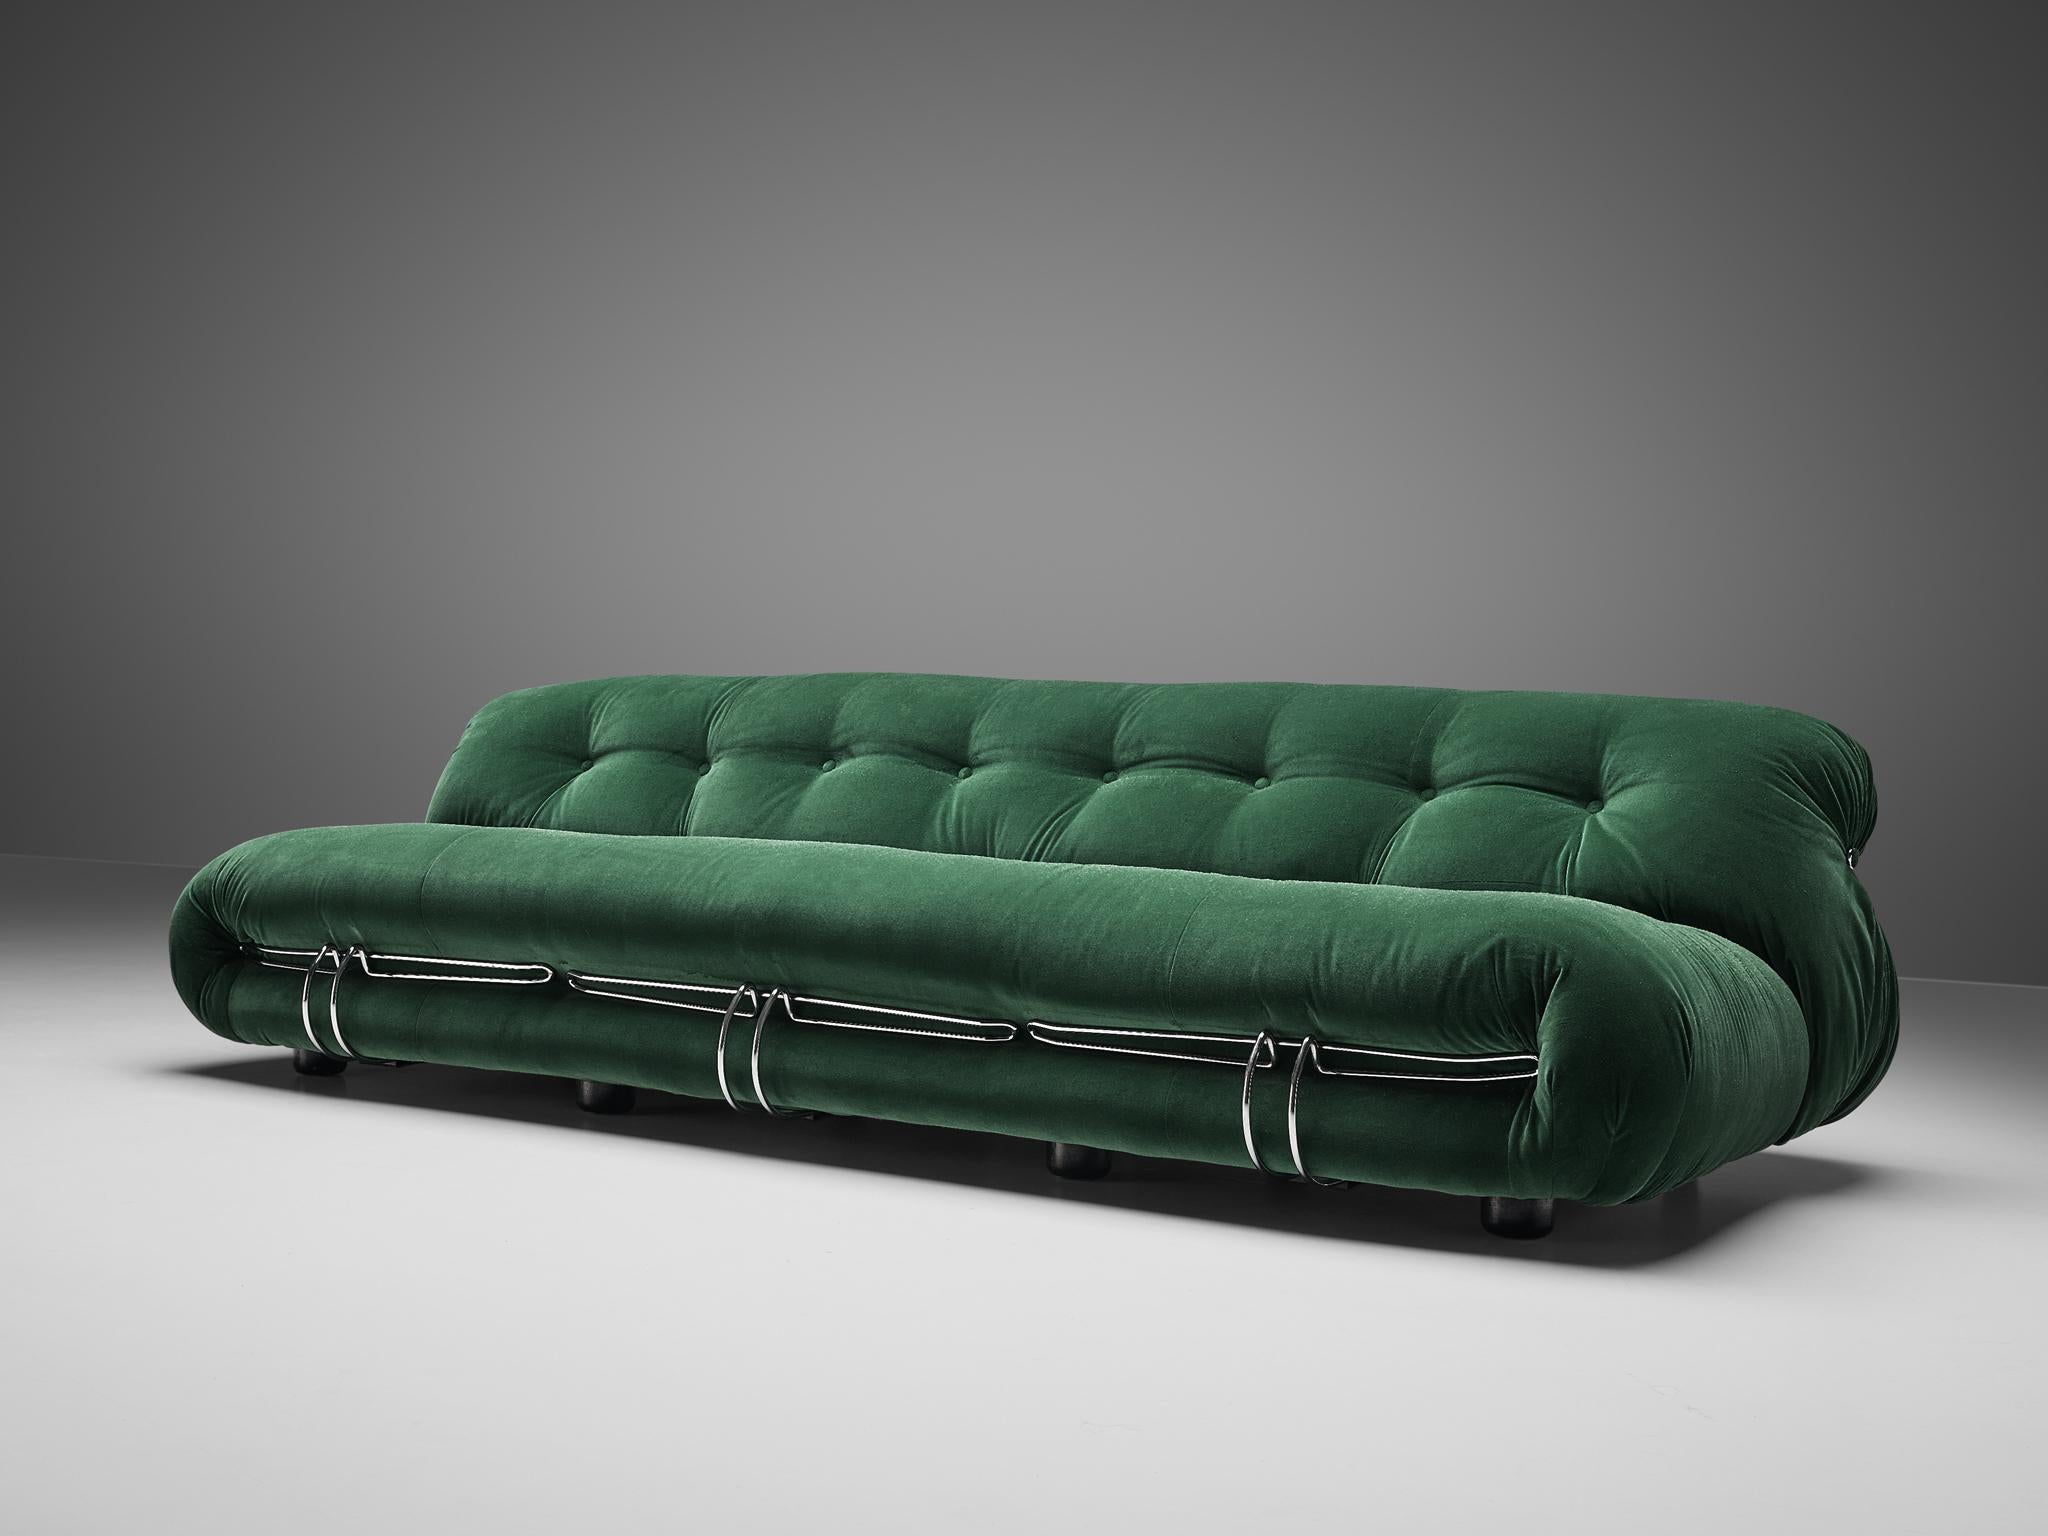 Afra & Tobia Scarpa for Cassina, 'Soriana' sofa, green velvet upholstery, metal, Italy, 1969

Iconic sofa by Italian designer couple Afra & Tobia Scarpa, the Soriana proposes a model that institutionalizes the image of the informal sitting where